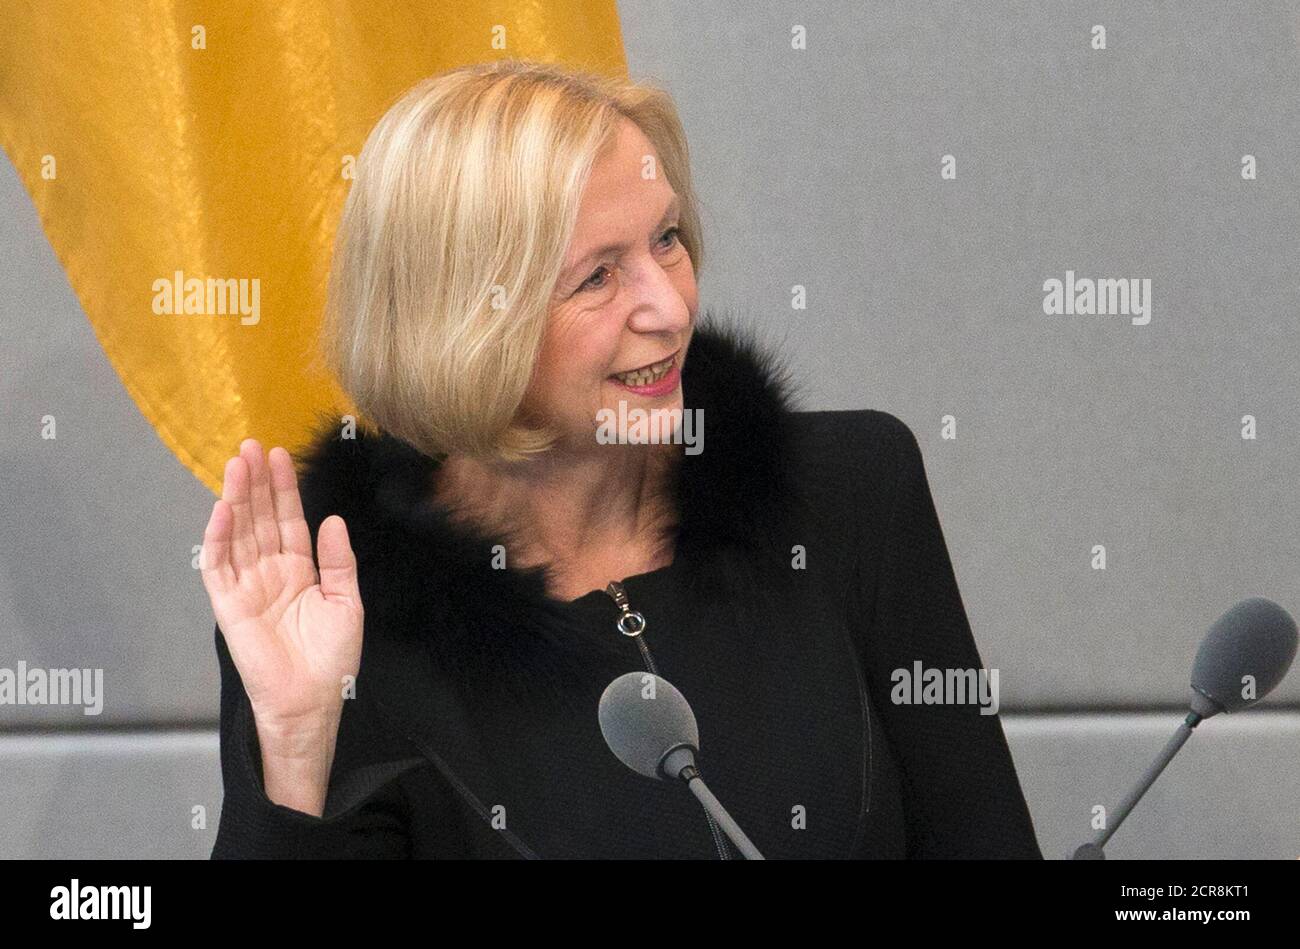 Germany's new Education Minister Johanna Wanka swears the oath of office during a session of the Bundestag, the lower house of parliament in Berlin February 21, 2013. REUTERS/Thomas Peter  (GERMANY  - Tags: POLITICS) Stock Photo